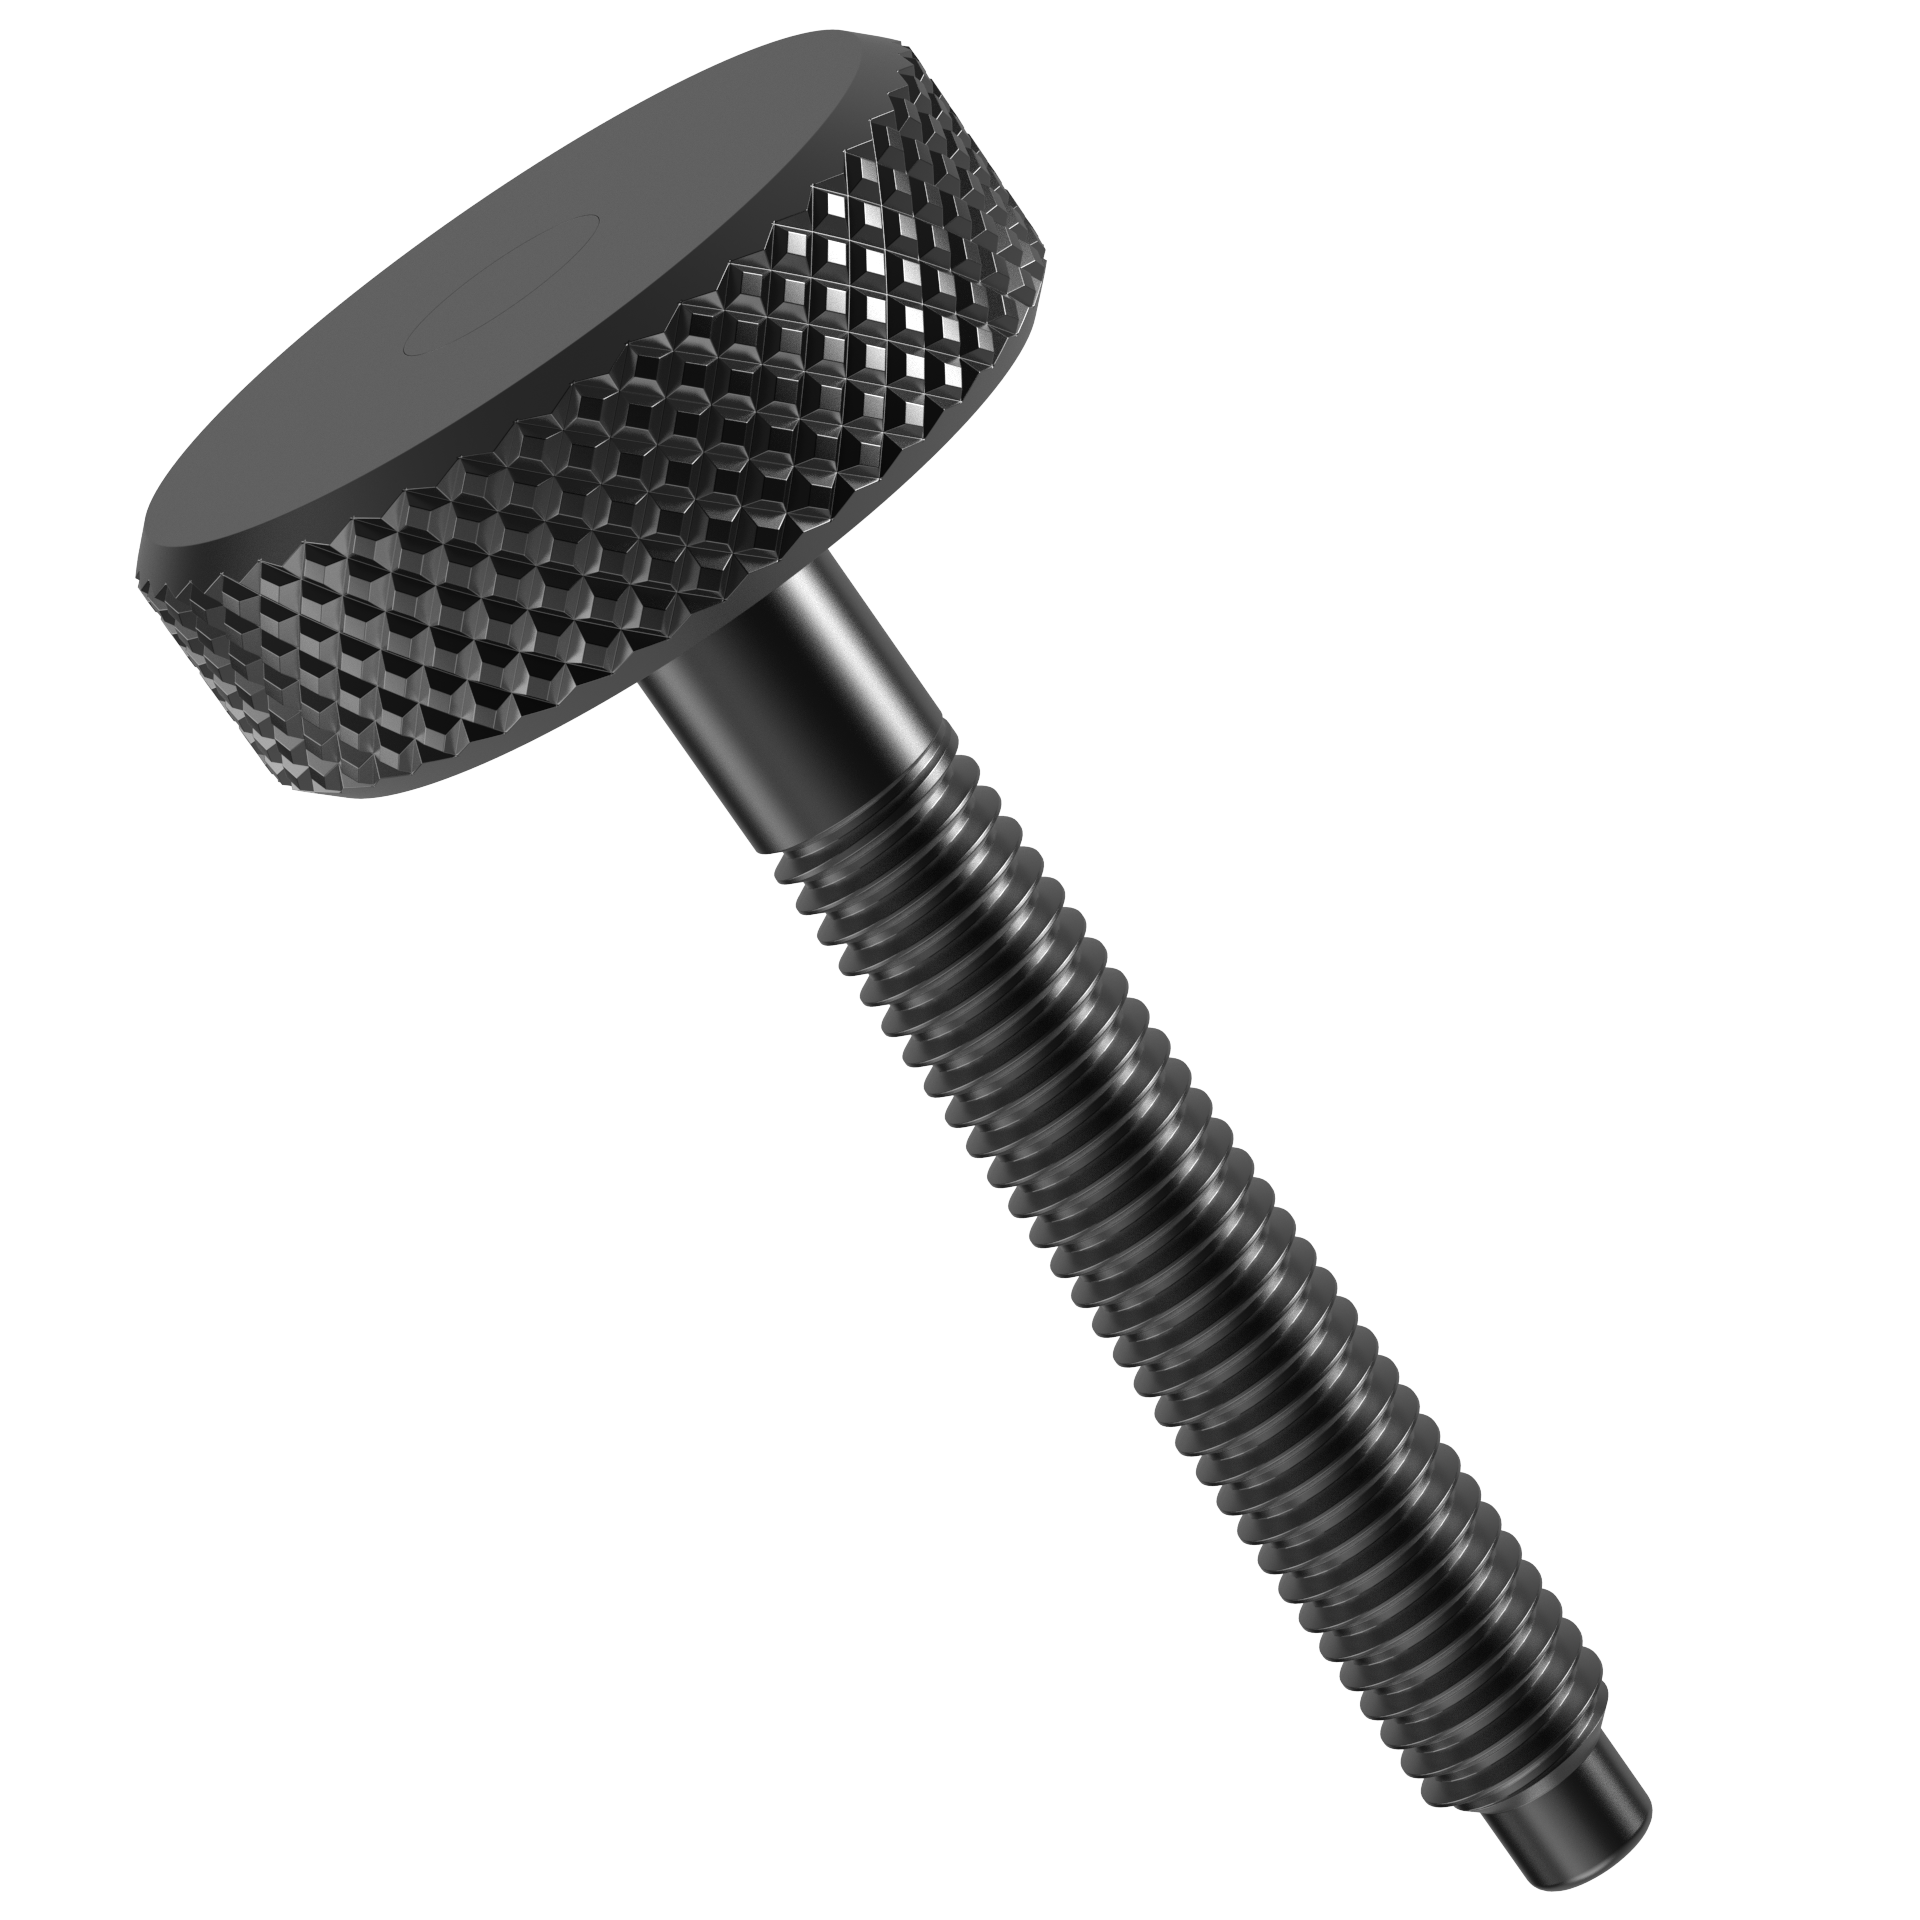 Thread Size #10-32 FastenerParts Knurled-Head Thumb Screw Low-Profile 18-8 Stainless Steel 